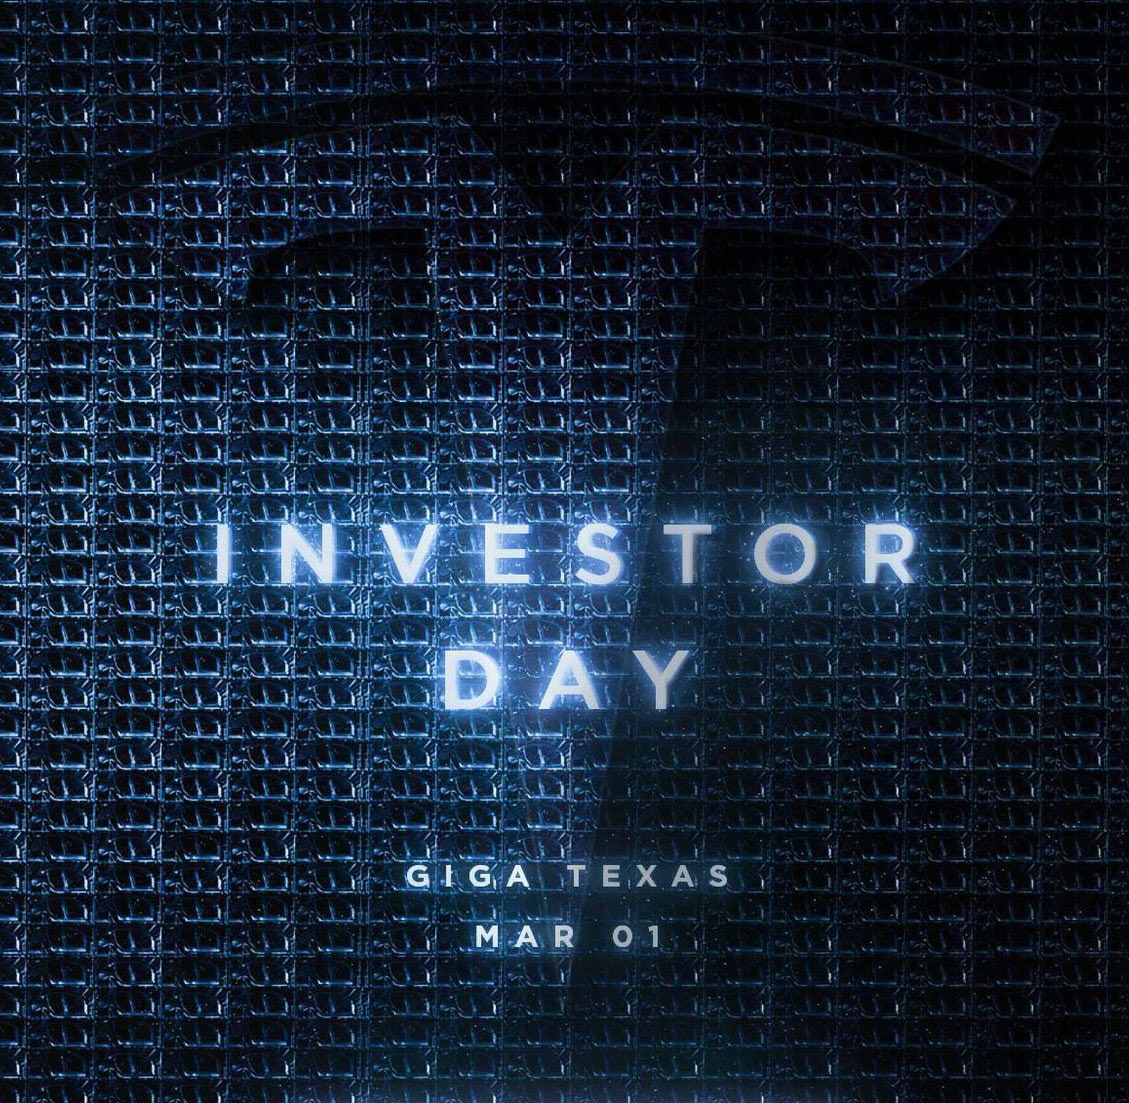 Tesla's Investor Day will take place on March 1, 2023